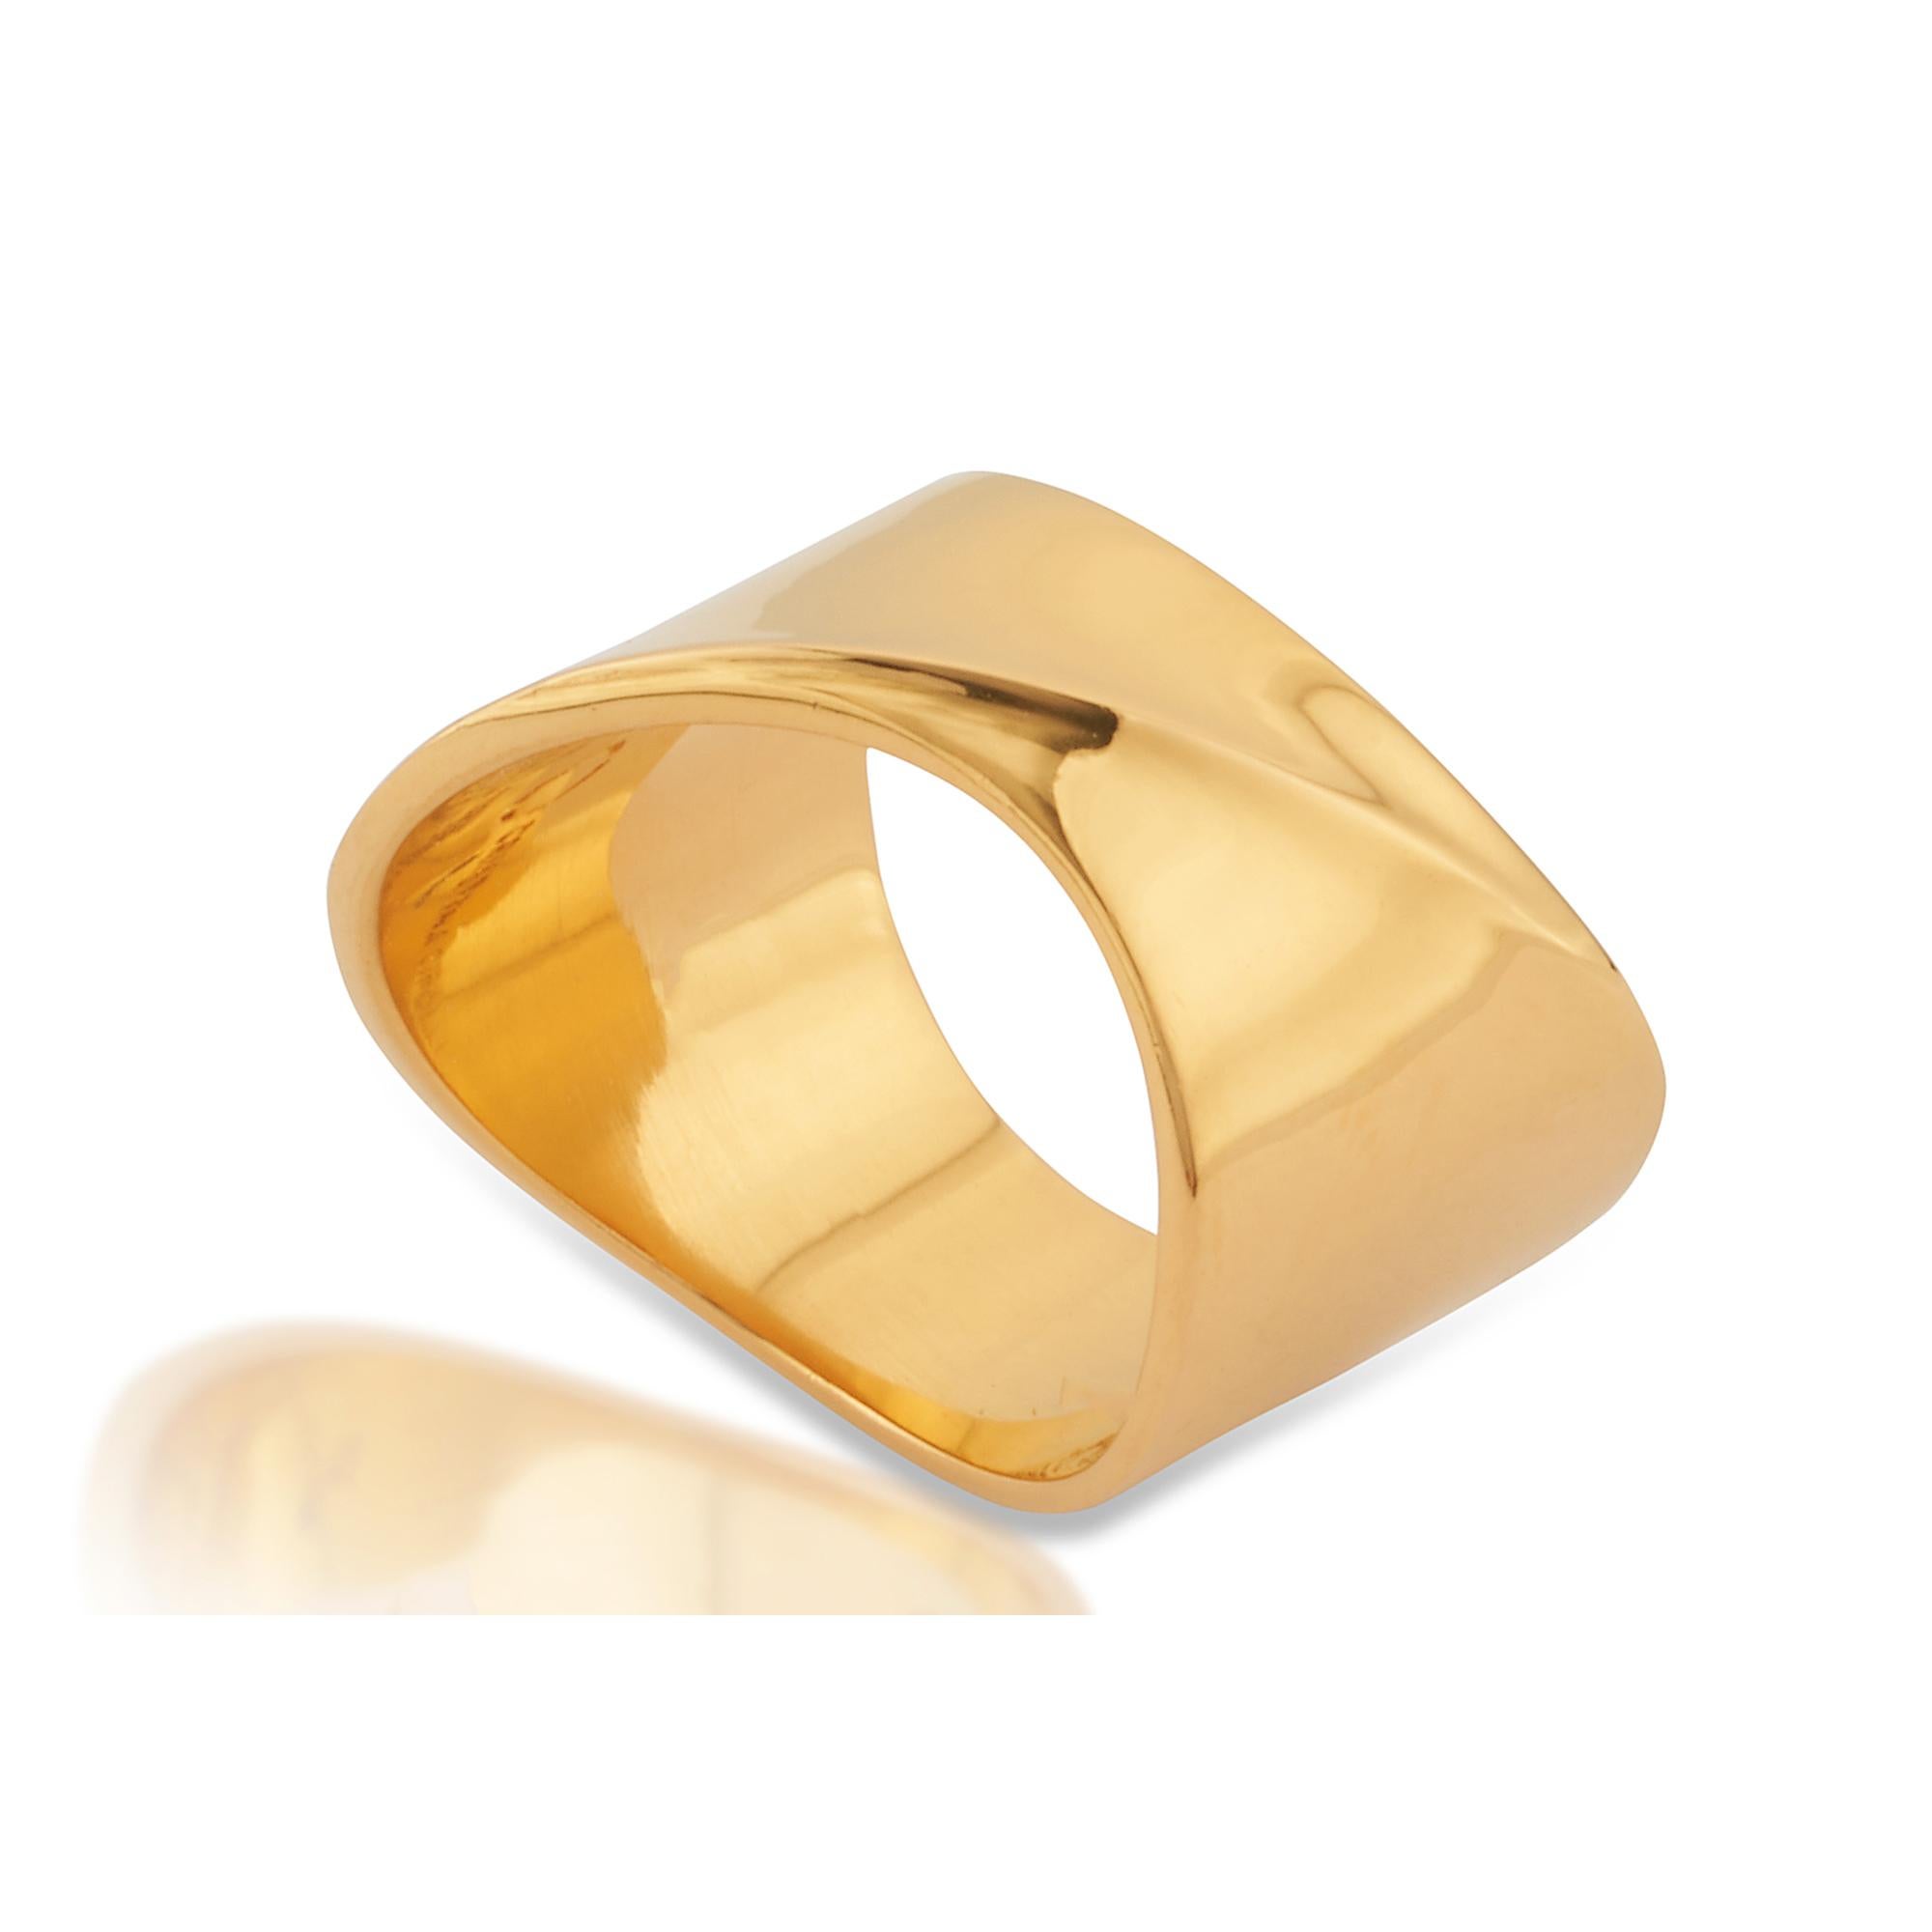 Unisex band ring with a minimalistic and bold design. Perfect worn solo or horizontally stacked with multiple rings from the same collection. 
Size UK P - US 7 1/2 in stock, more sizes available upon request, made to order items are not